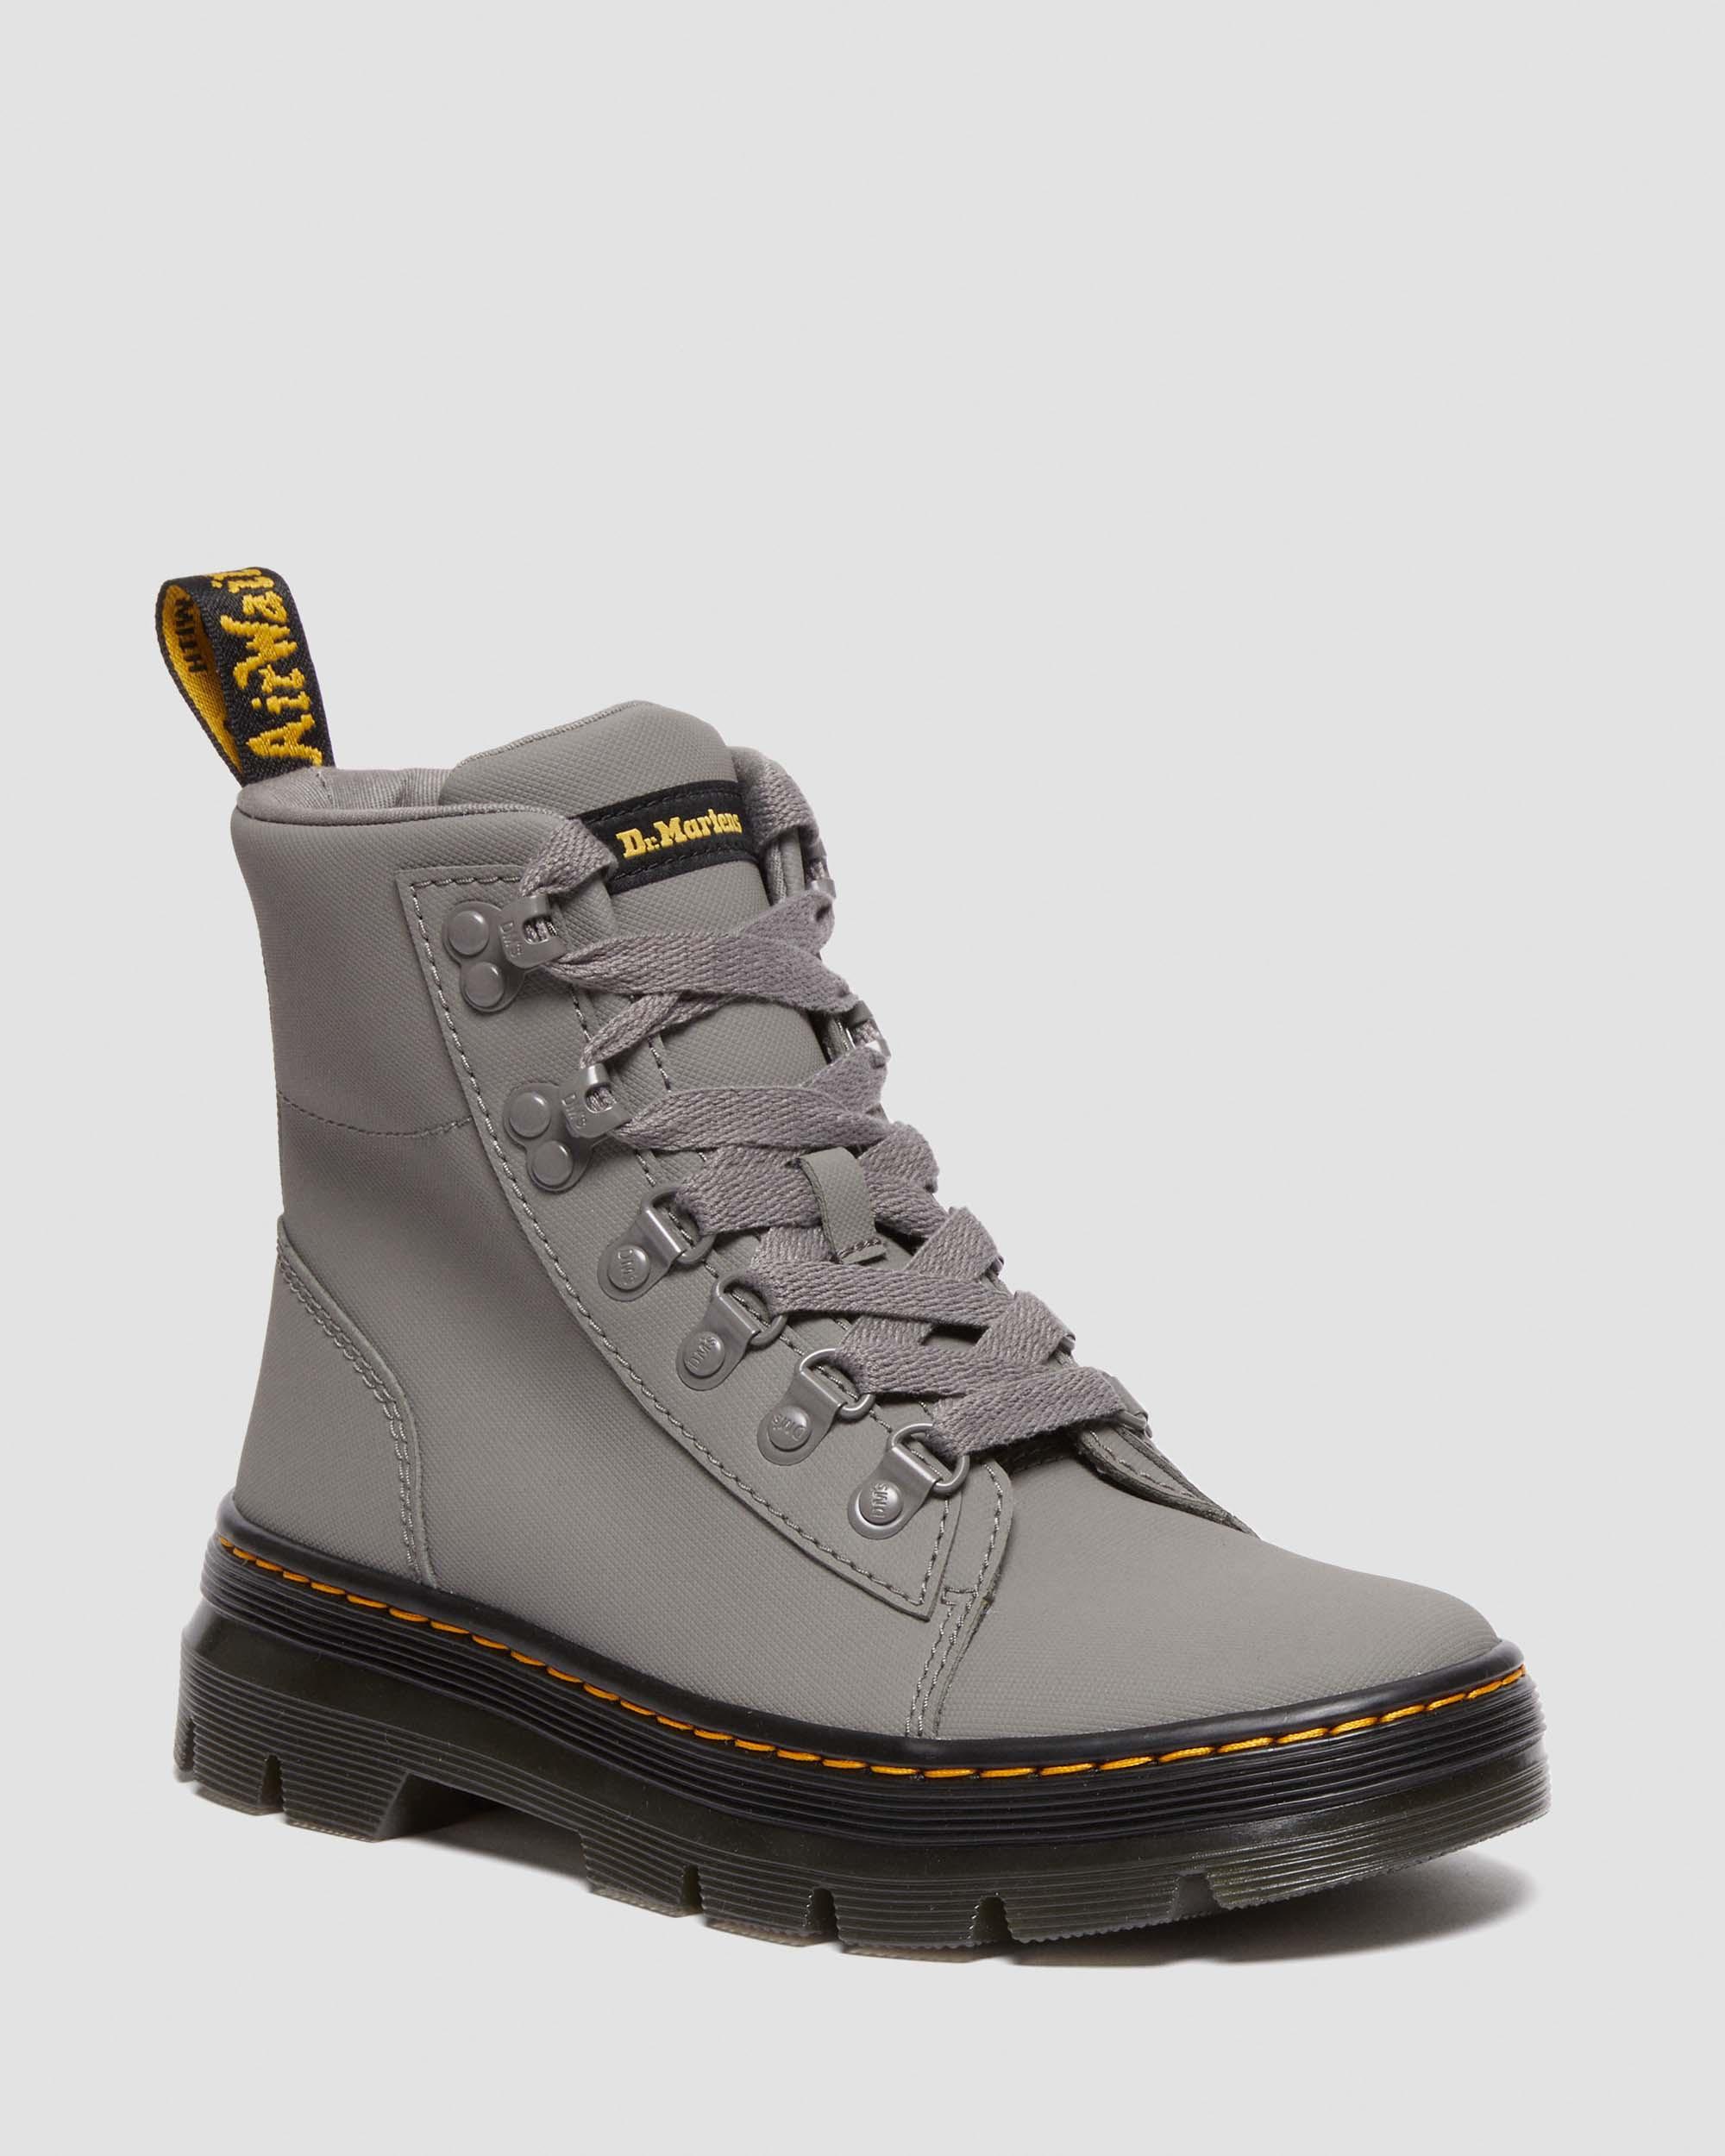 Dr. Martens Combs Ajax Leather Casual Boots in Gray | Lyst